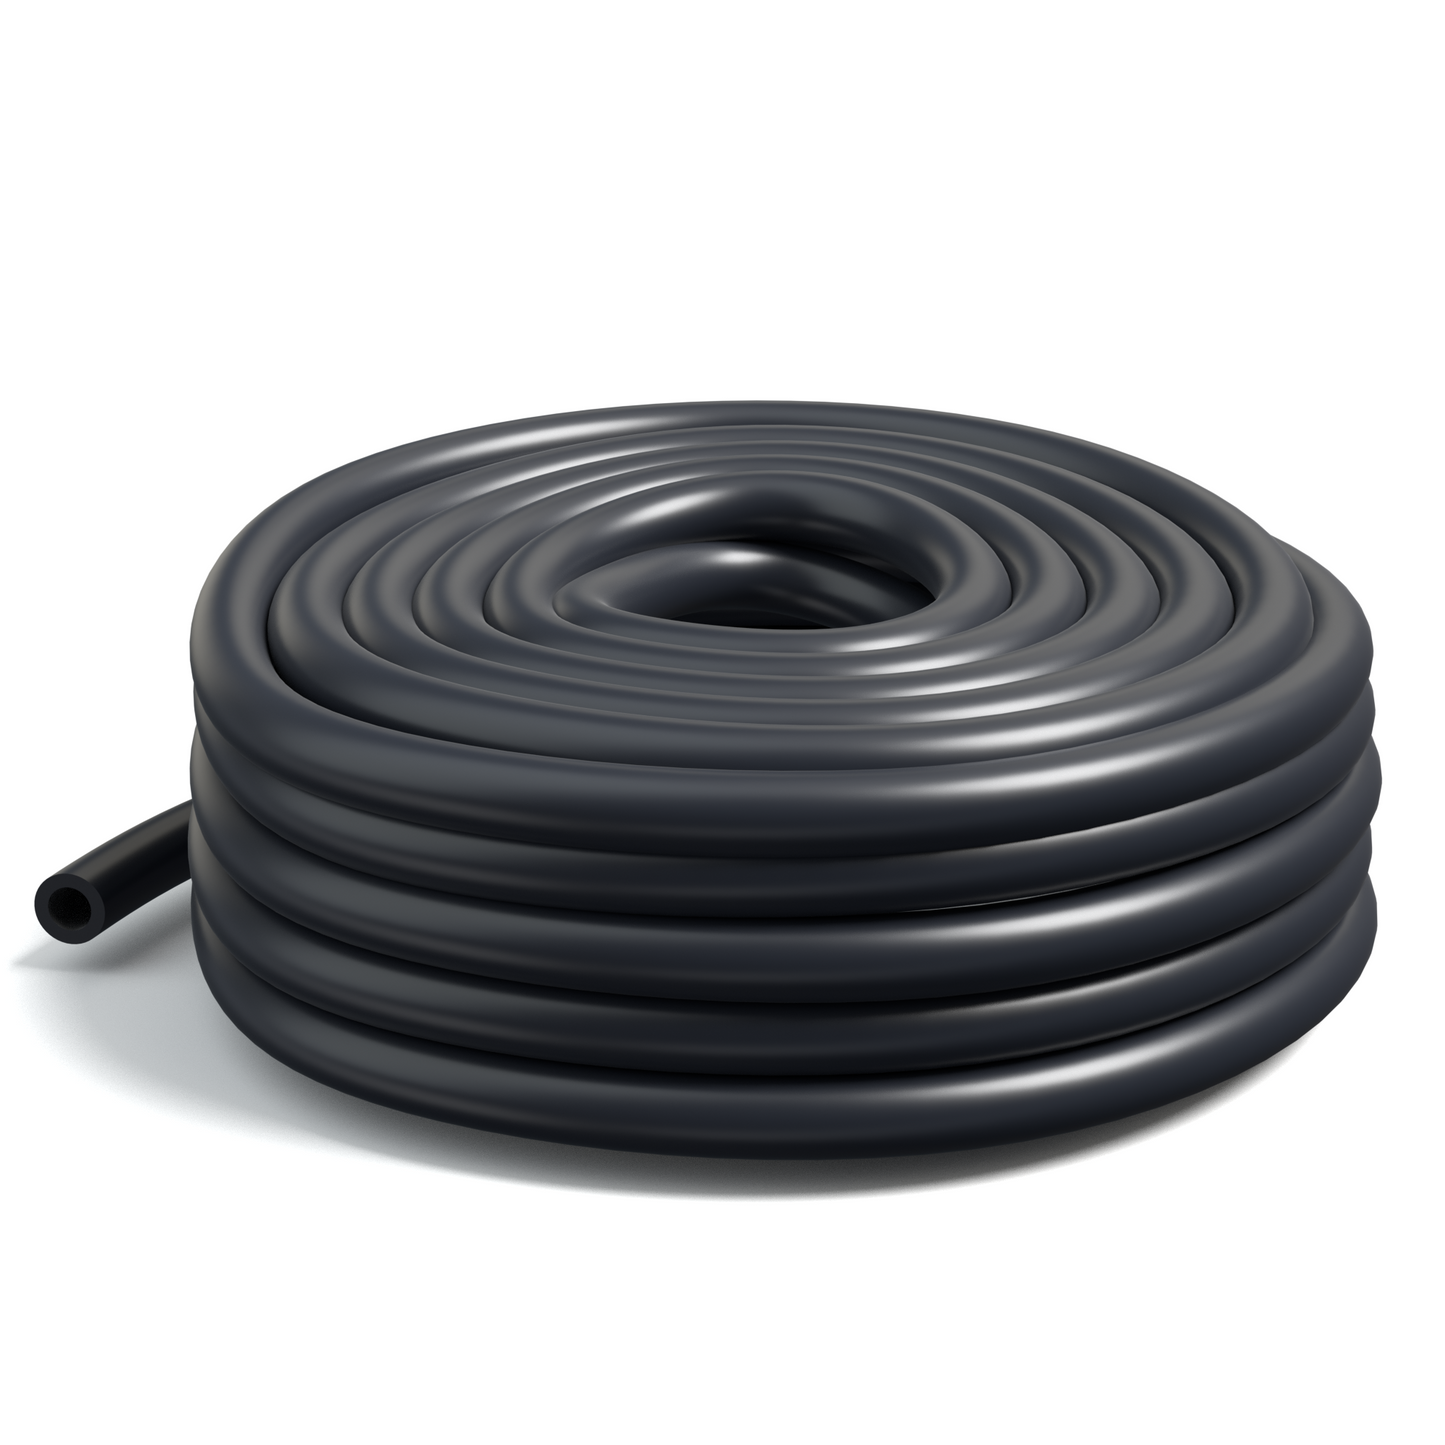 1/2" Weighted Pond Aeration Airline Tubing - 100' roll